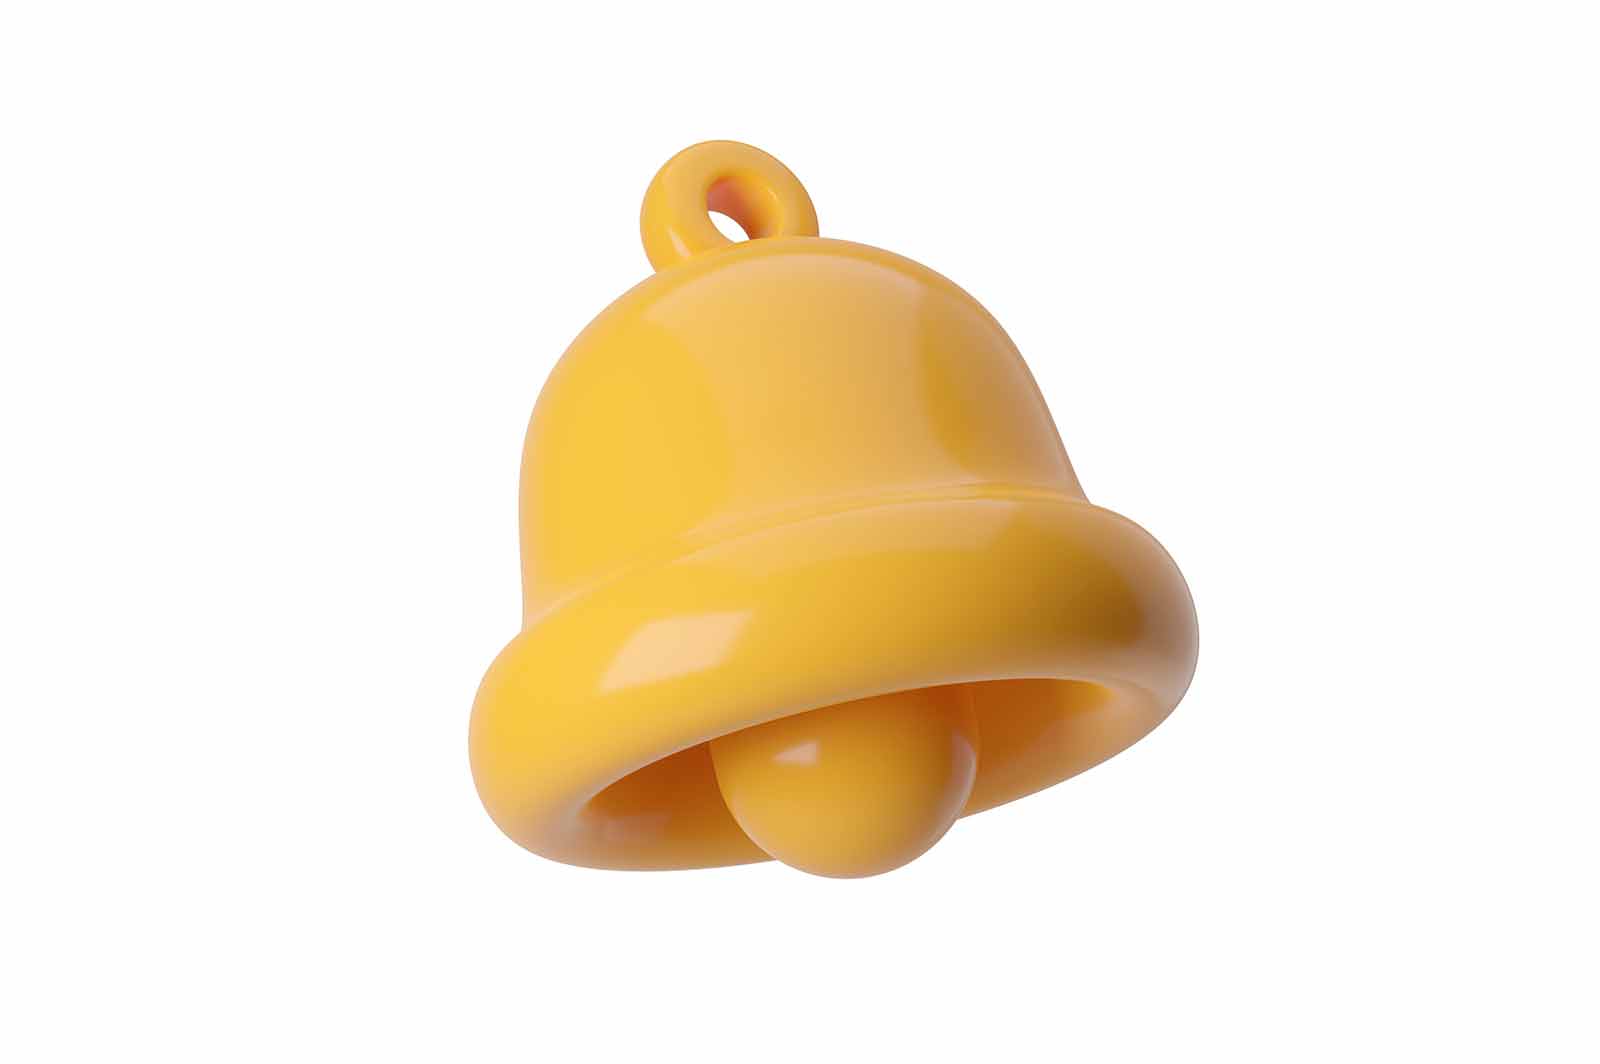 Notification Yellow bell, 3d rendered illustration of a traditional bell with a loop and a clapper